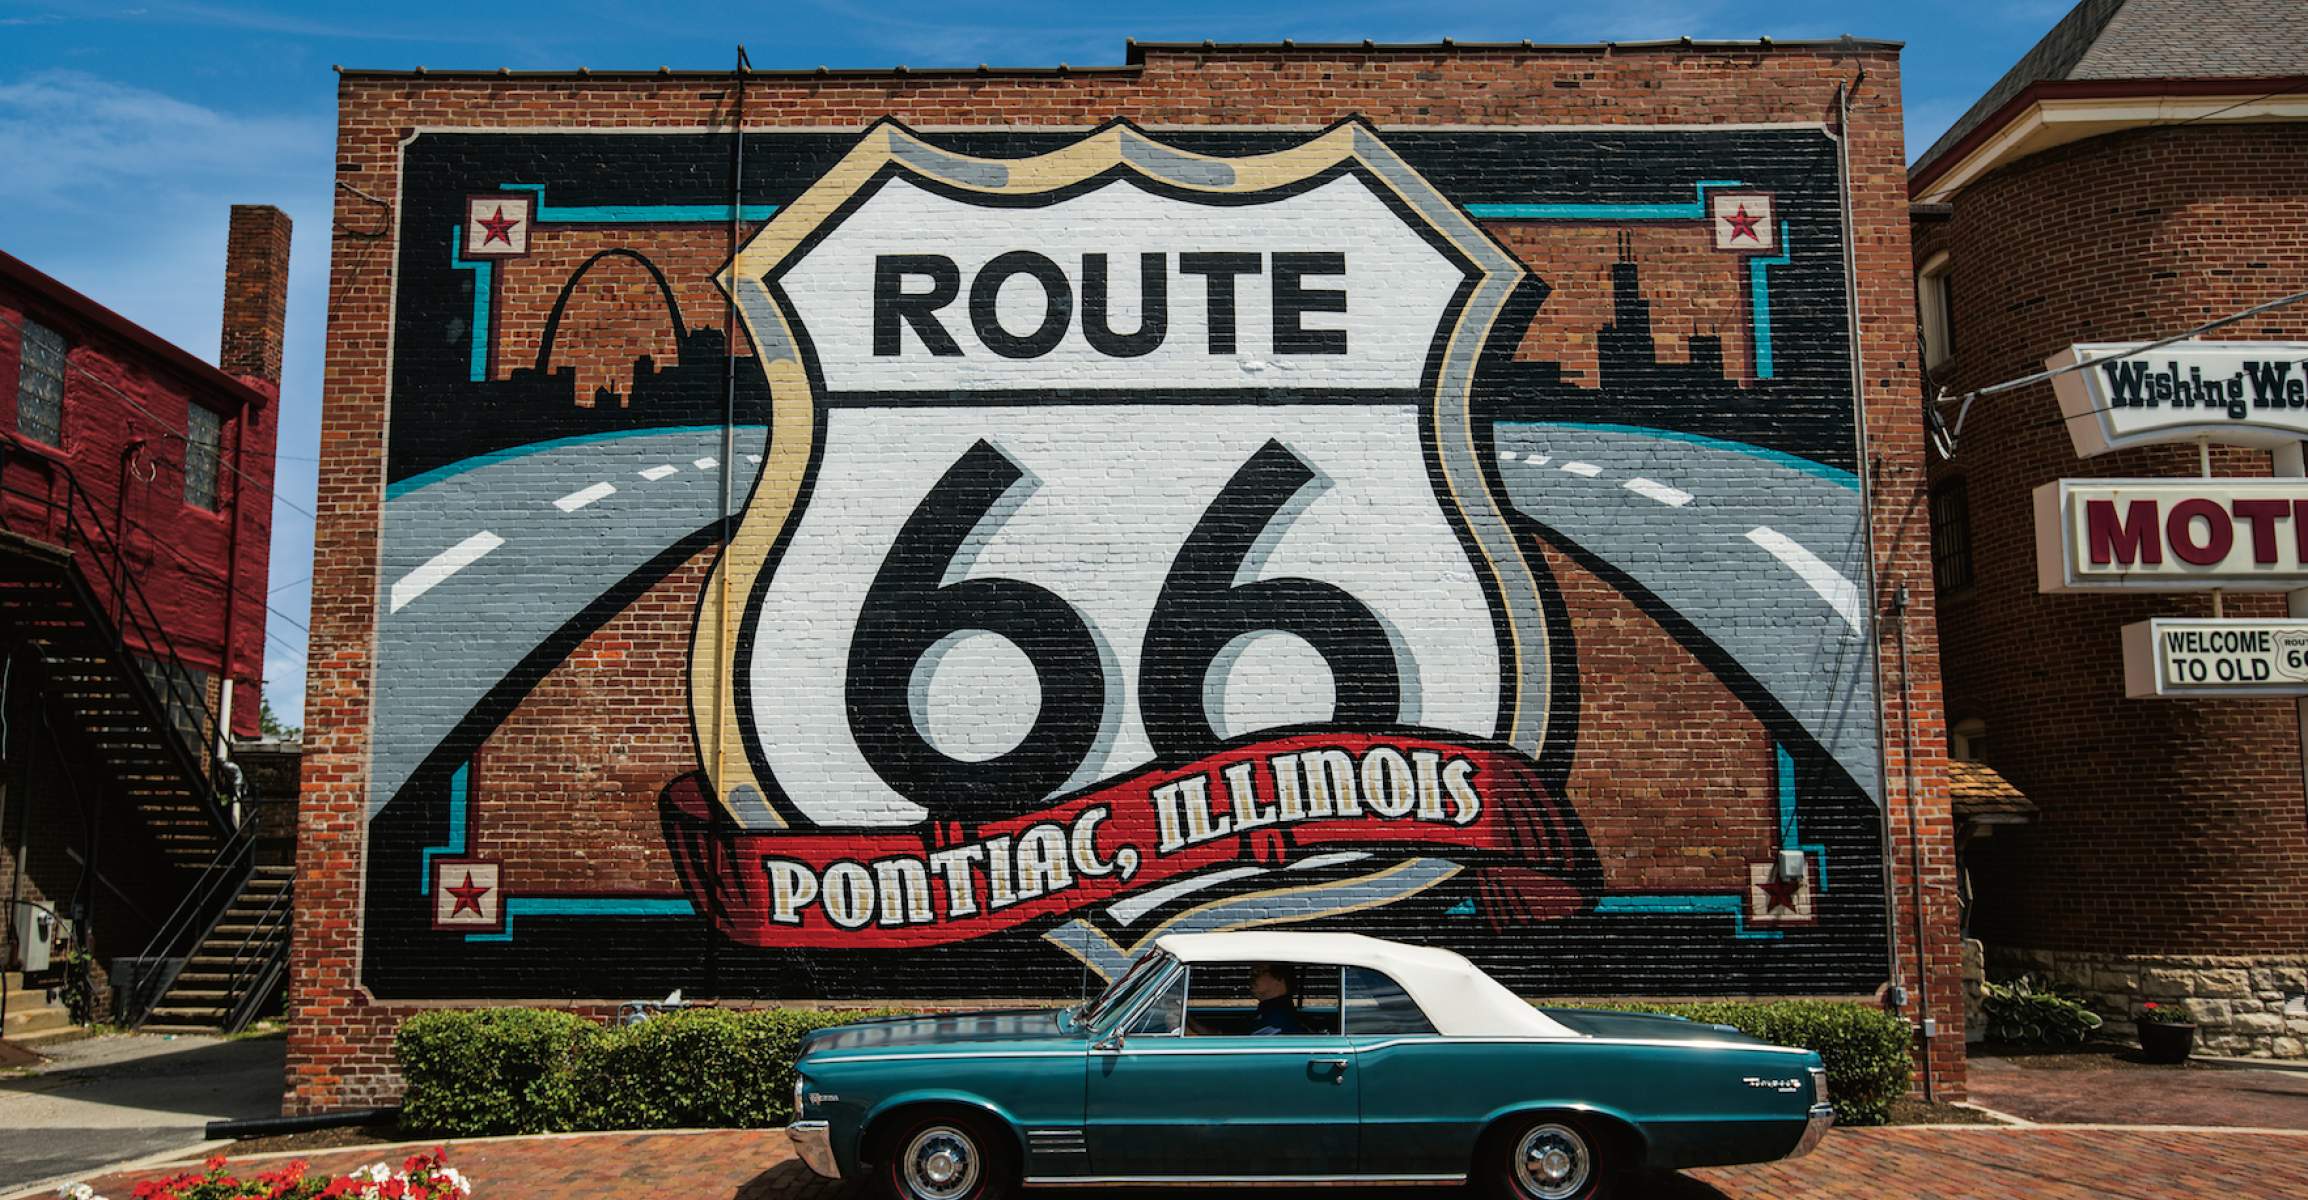 Route 66 Mural with a Pontiac car in front.